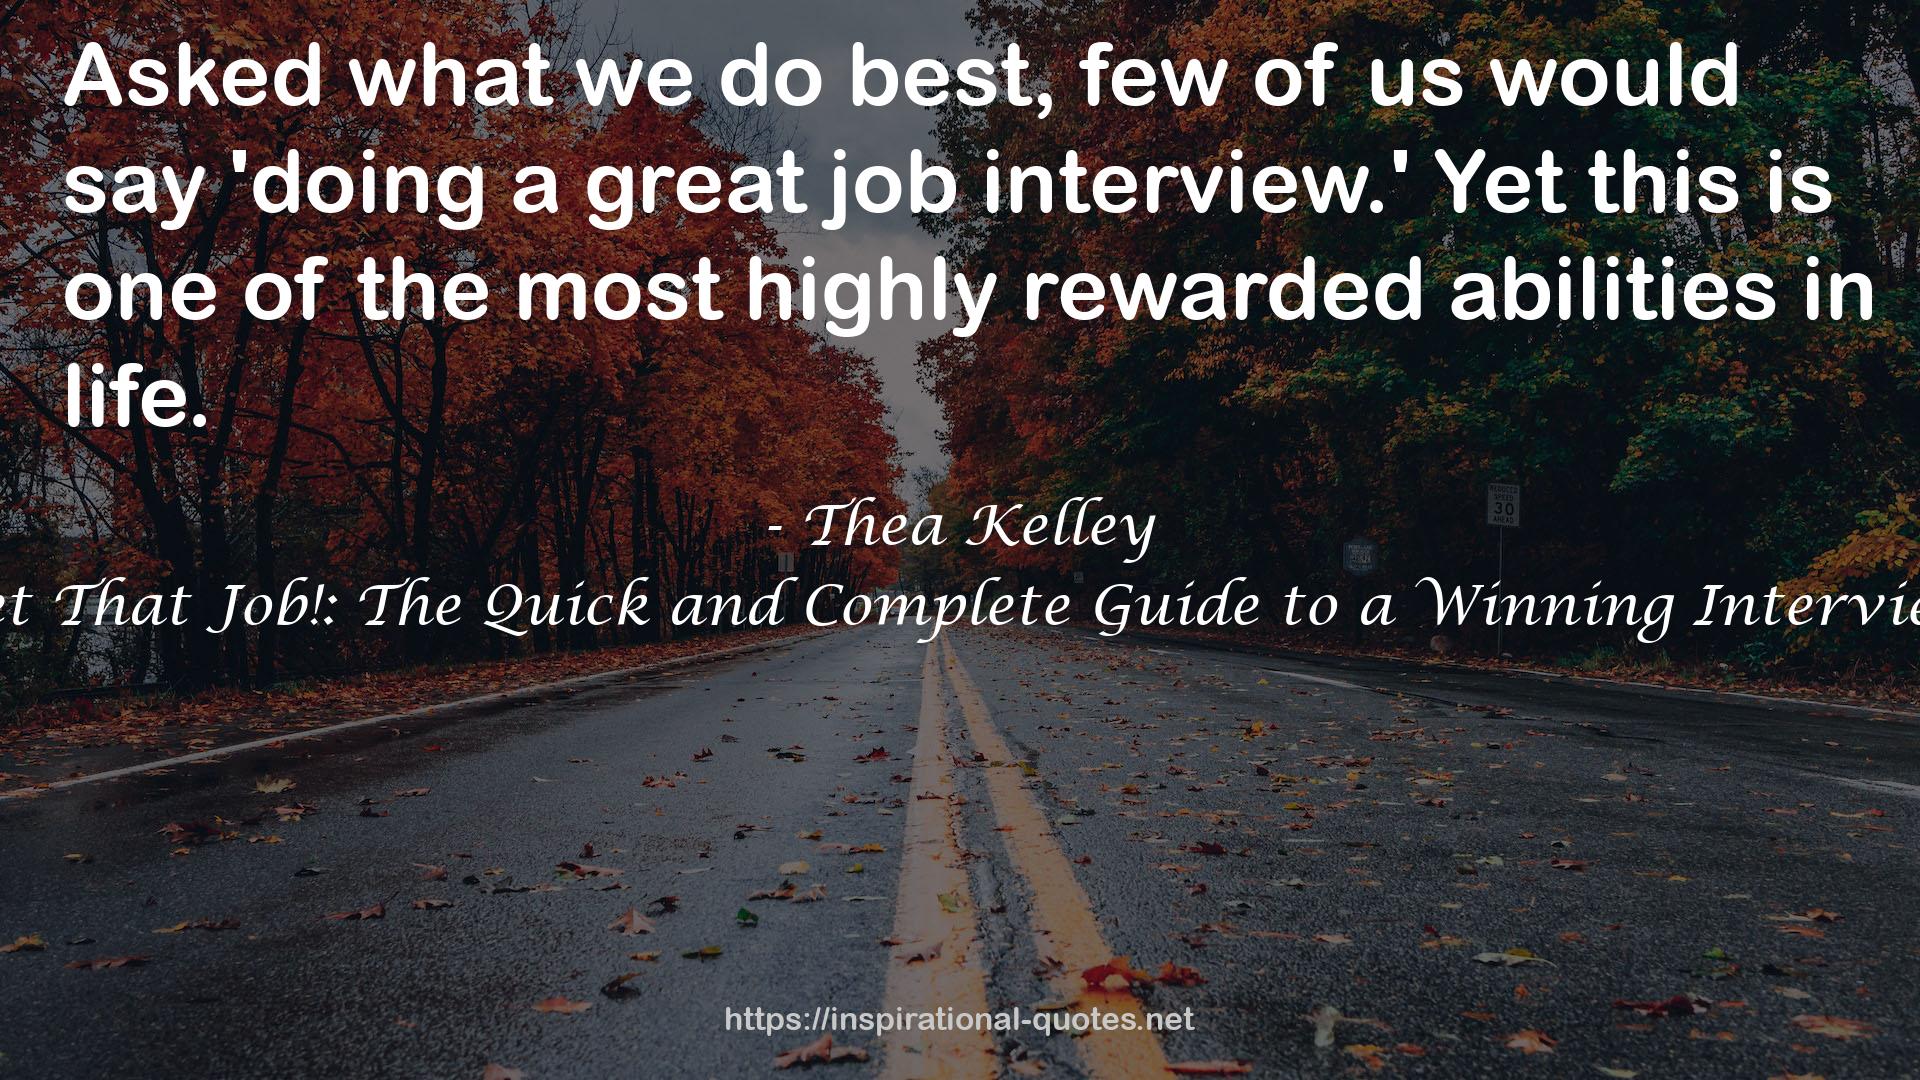 Thea Kelley QUOTES